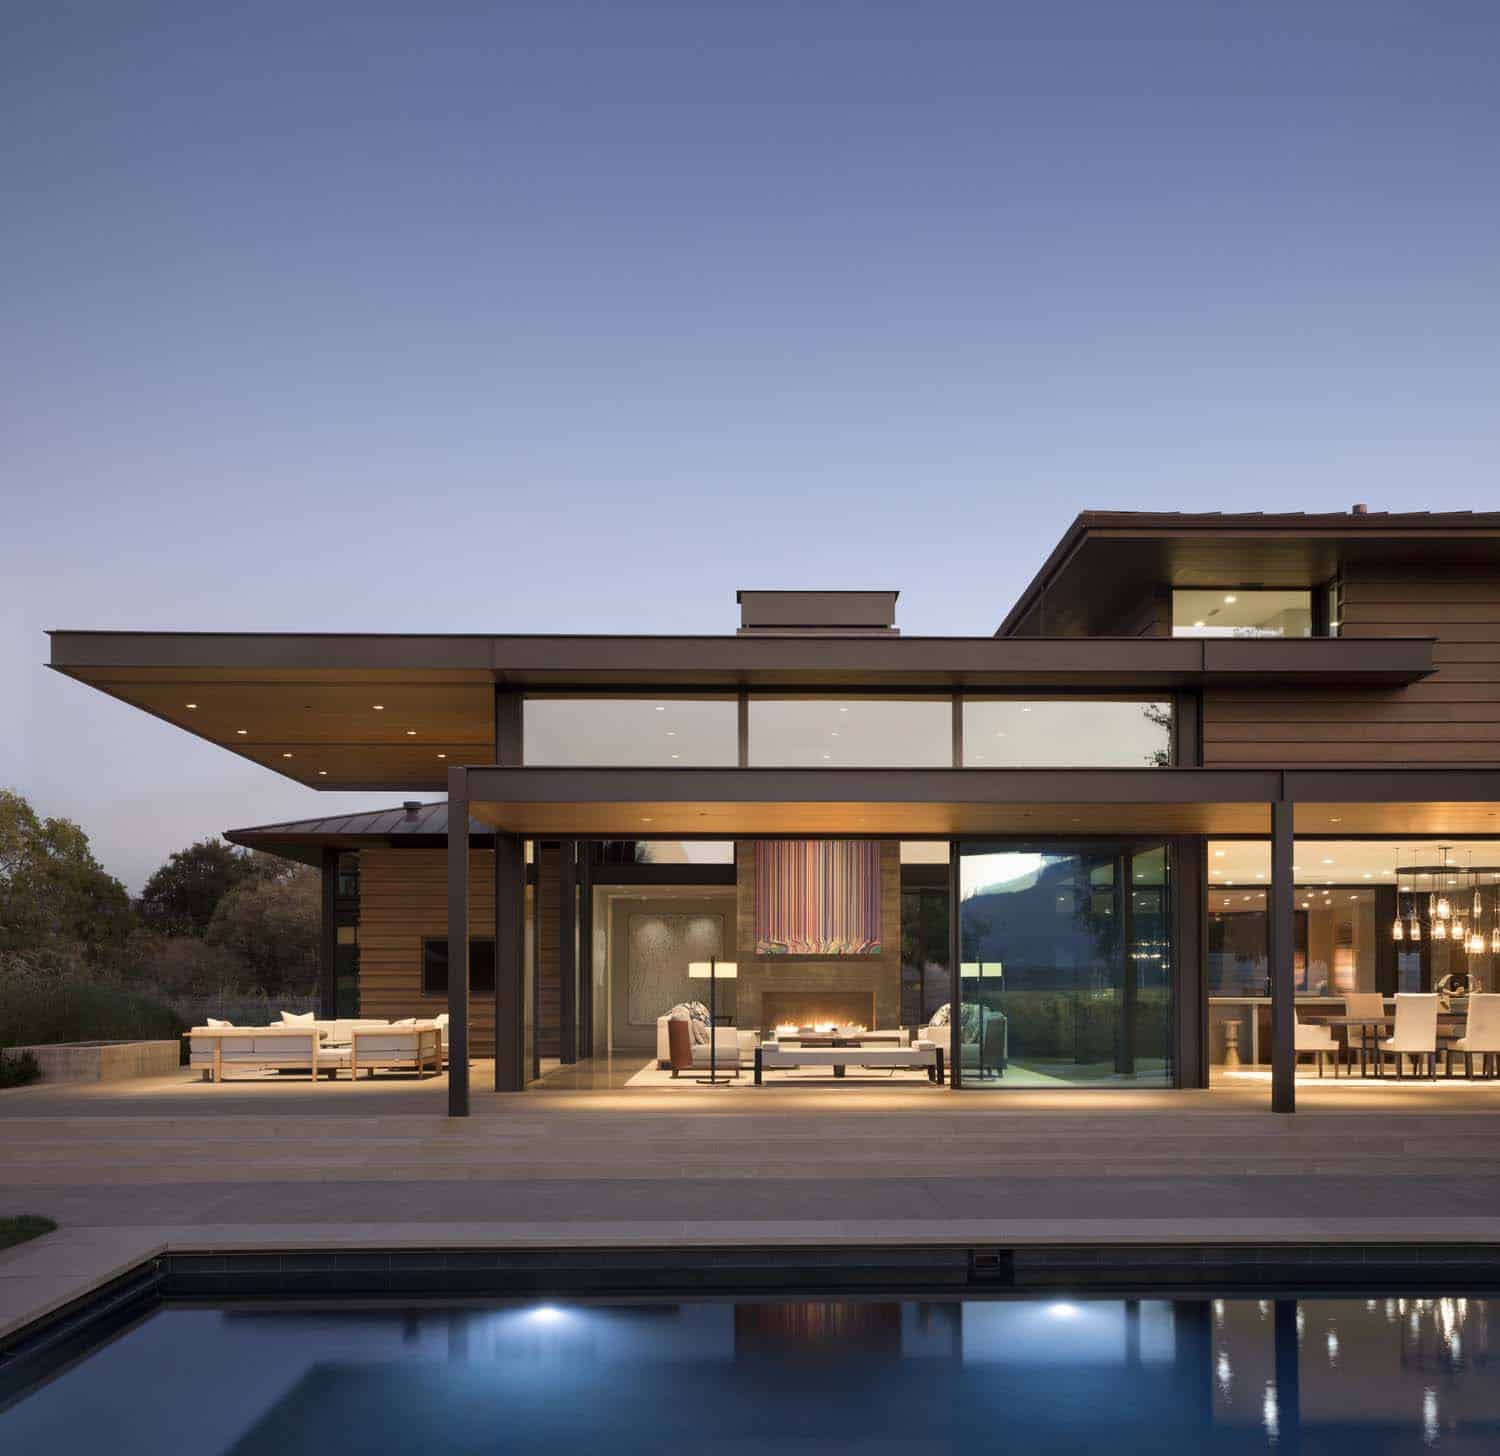 contemporary home exterior and swimming pool at dusk